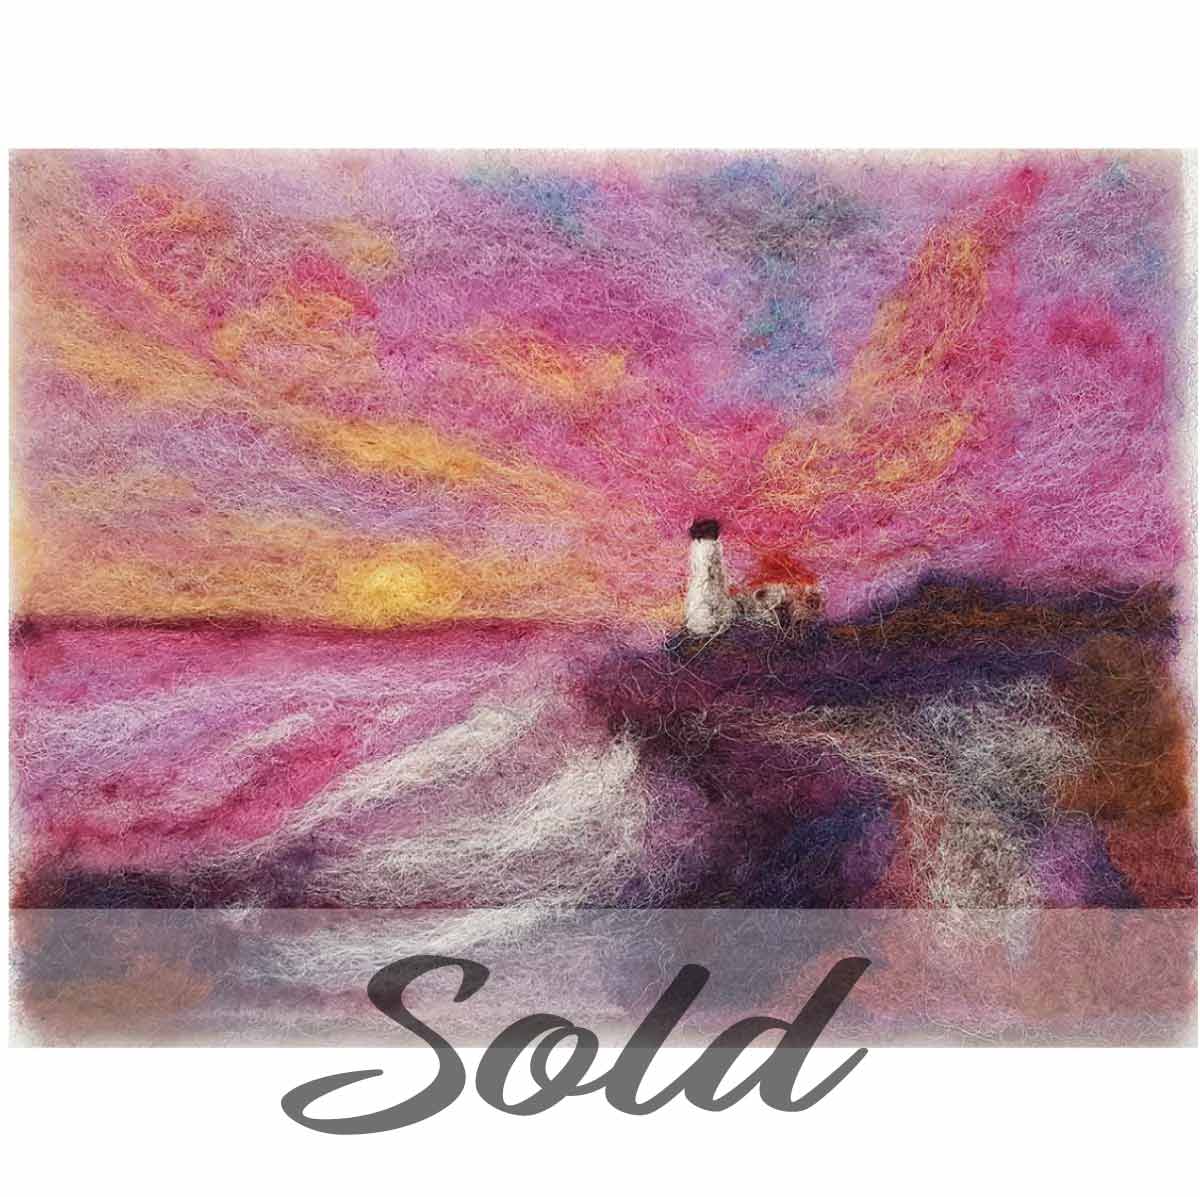 Portland-Headlight-wool-felted-illustration-by-Hillary-Dow-SOLD